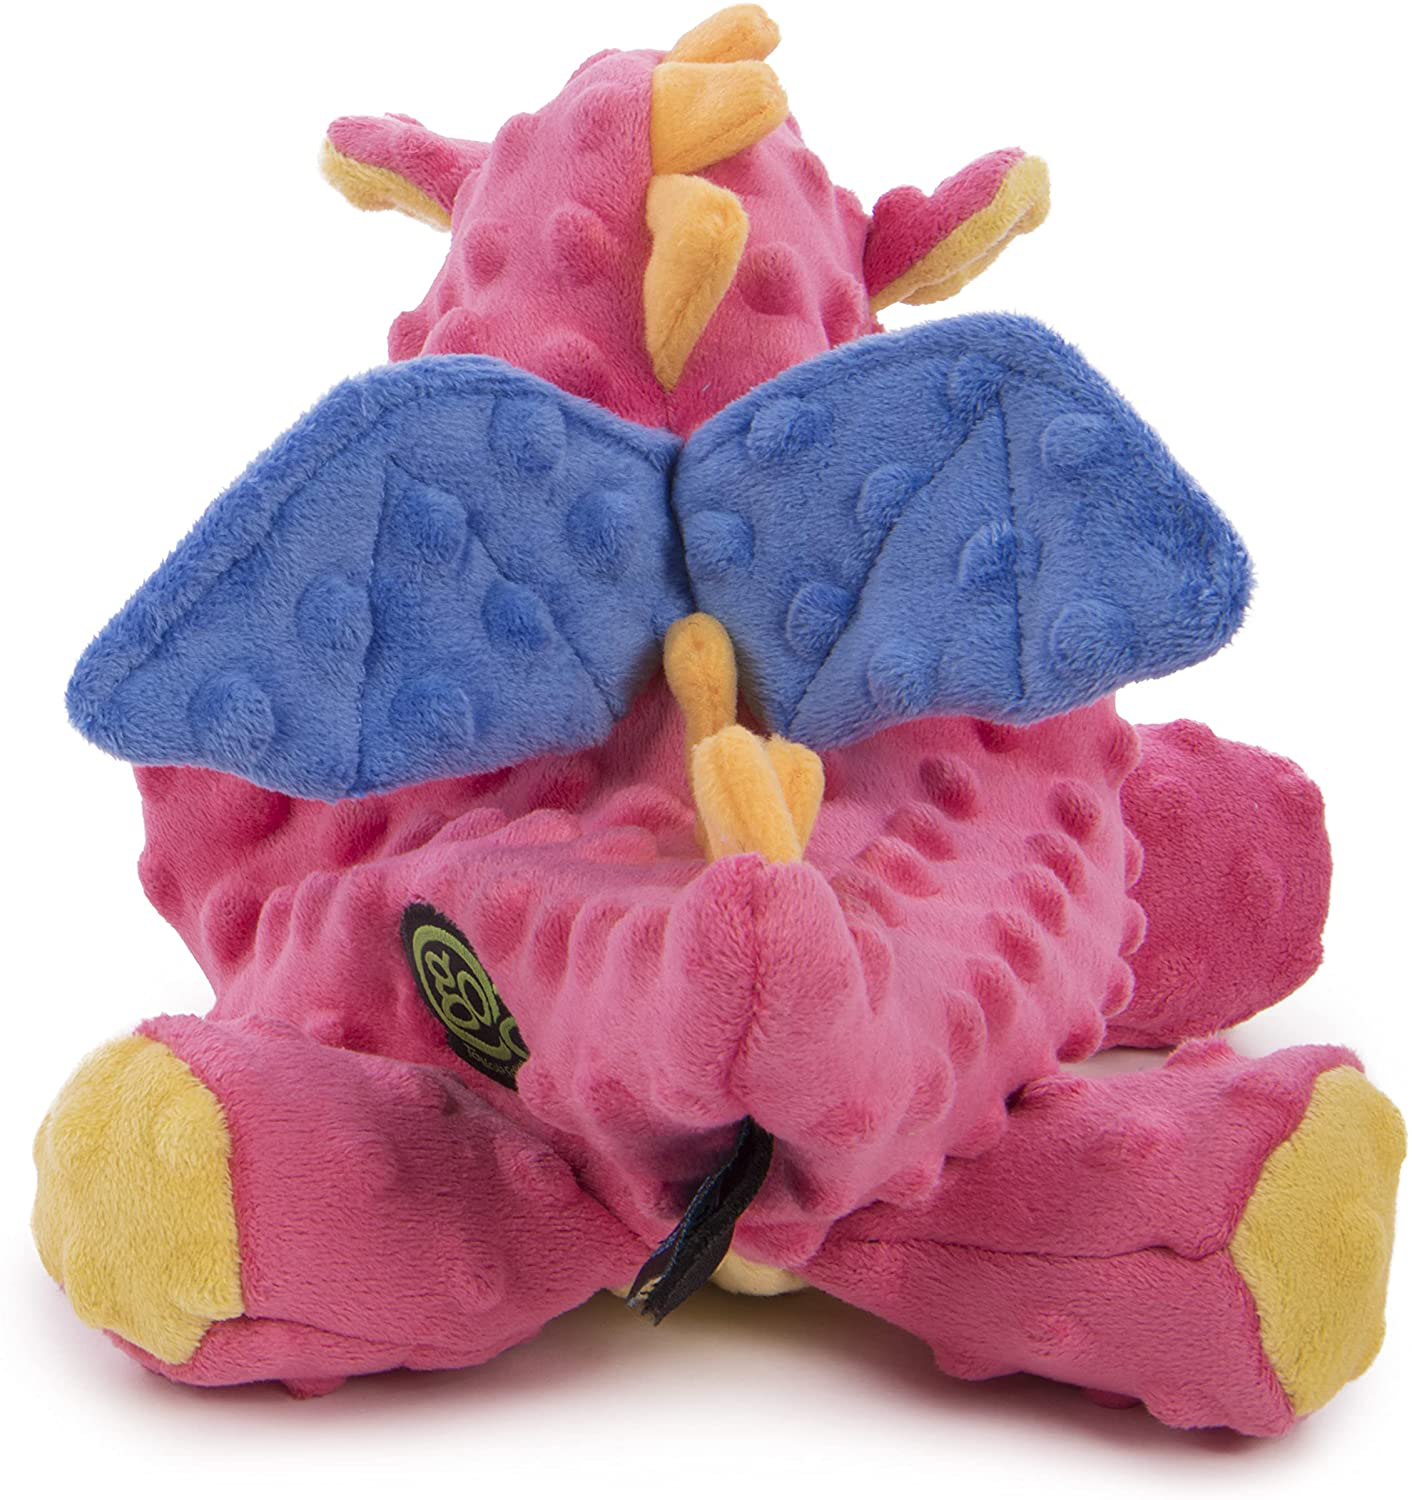 Godog, Dragon Squeaker Dog Toy, Chew Guard and Resistant Technology, Durable Plush, Soft, Tough, Reinforced Seams Animals & Pet Supplies > Pet Supplies > Dog Supplies > Dog Toys goDog   